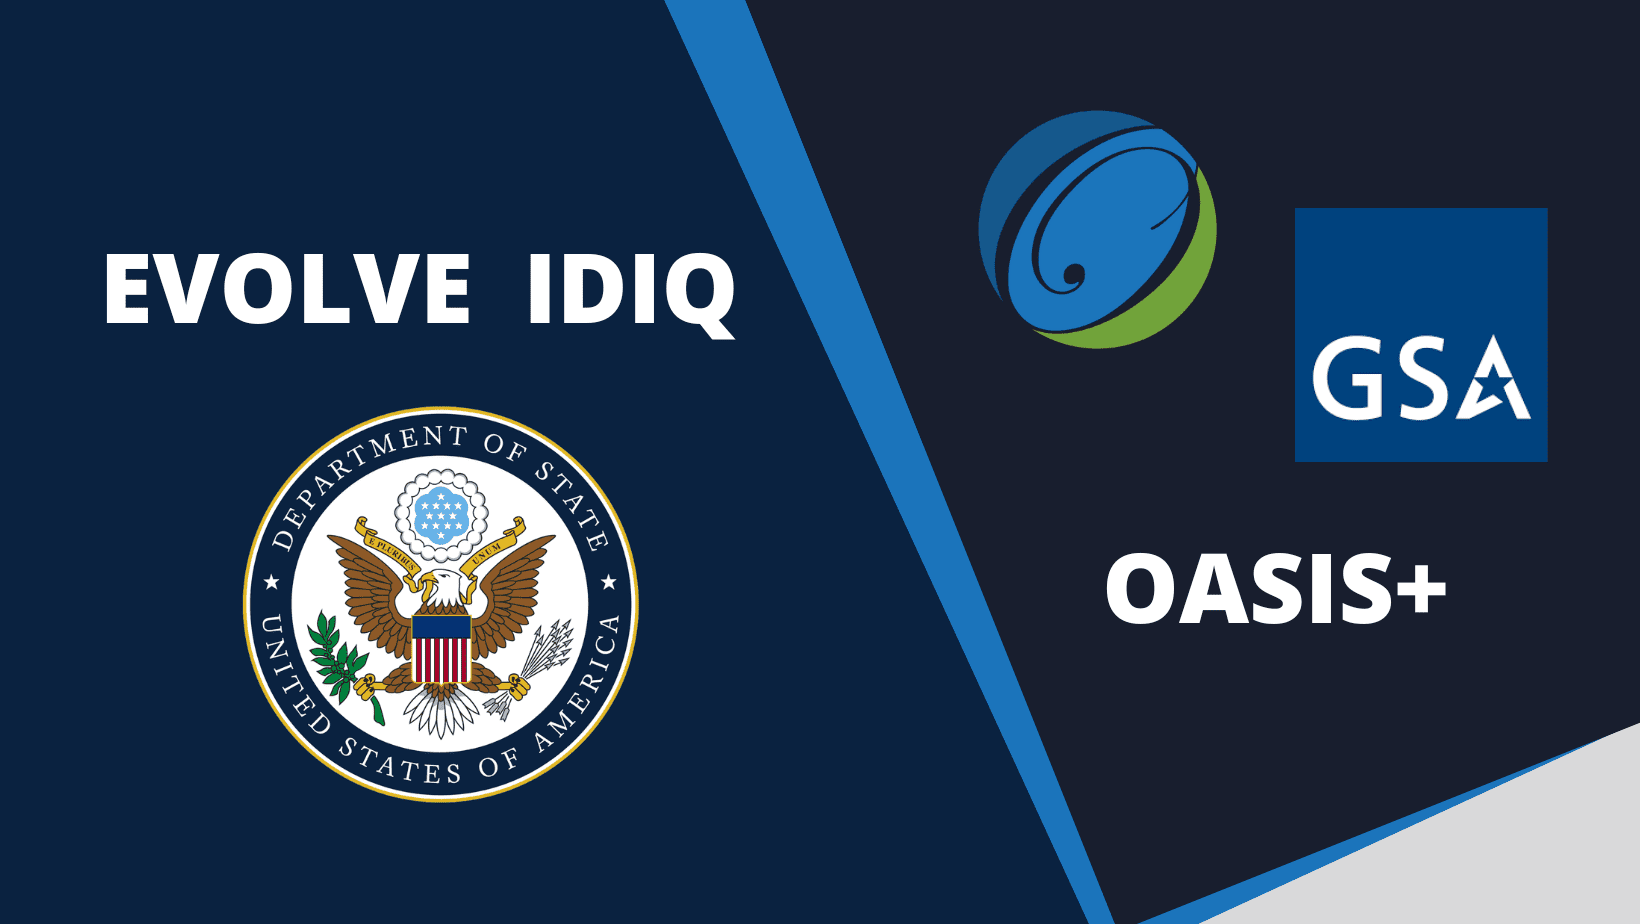 Maximize Your Scores on OASIS+ & Evolve IDIQs: Talk with Our Experts!